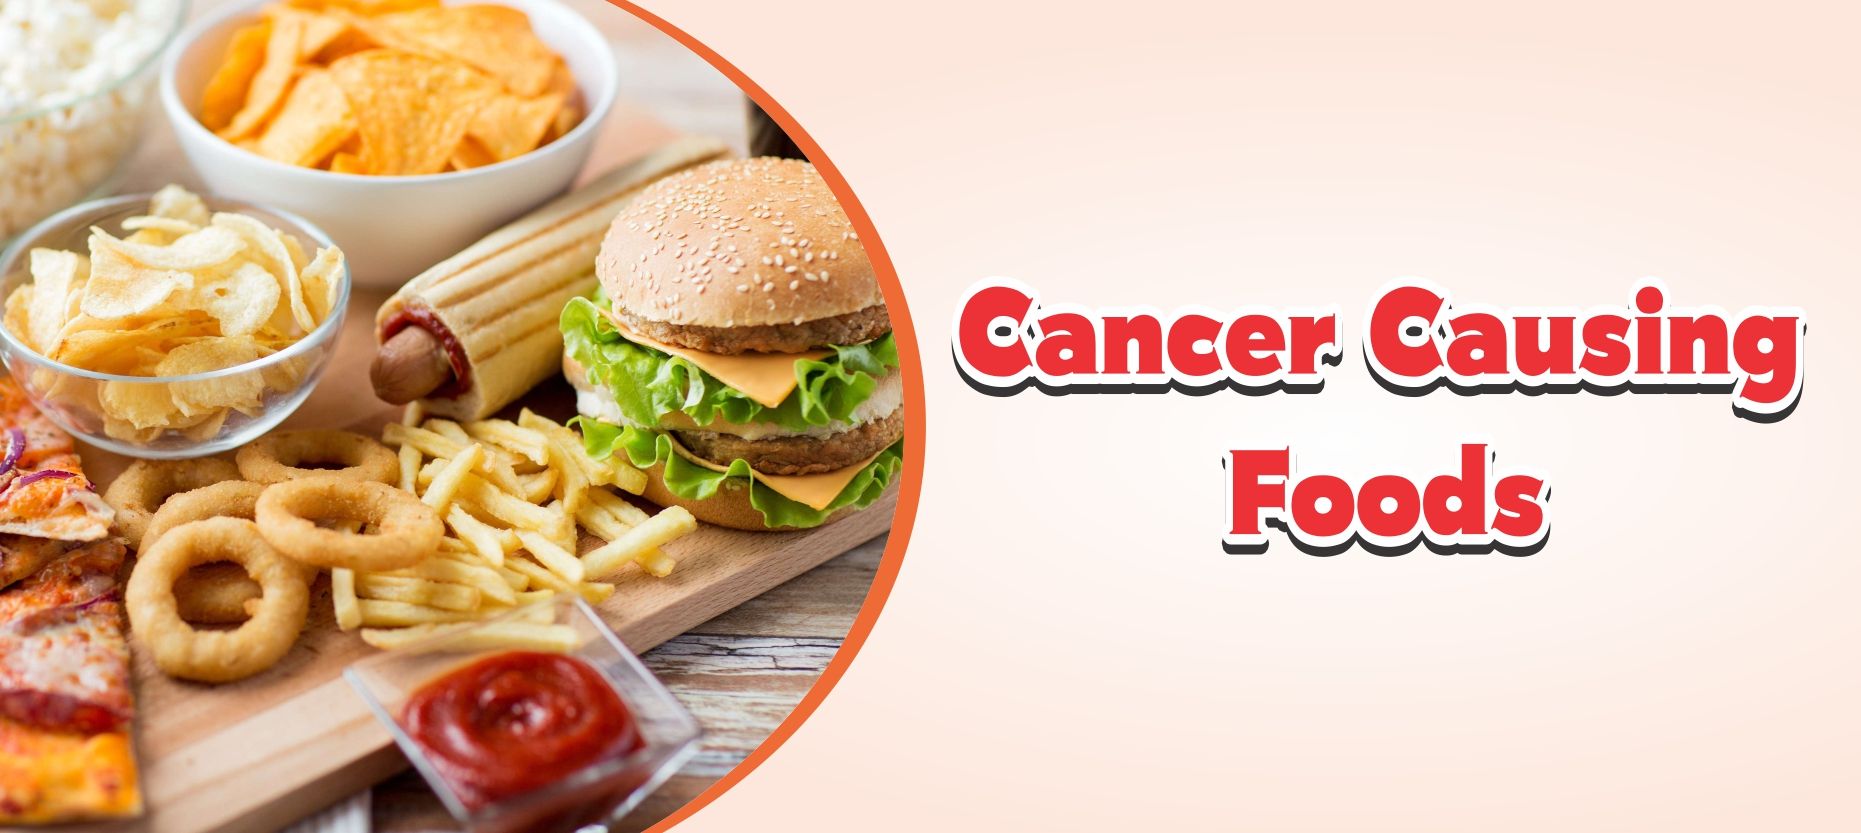 Cancer causing foods to avoid